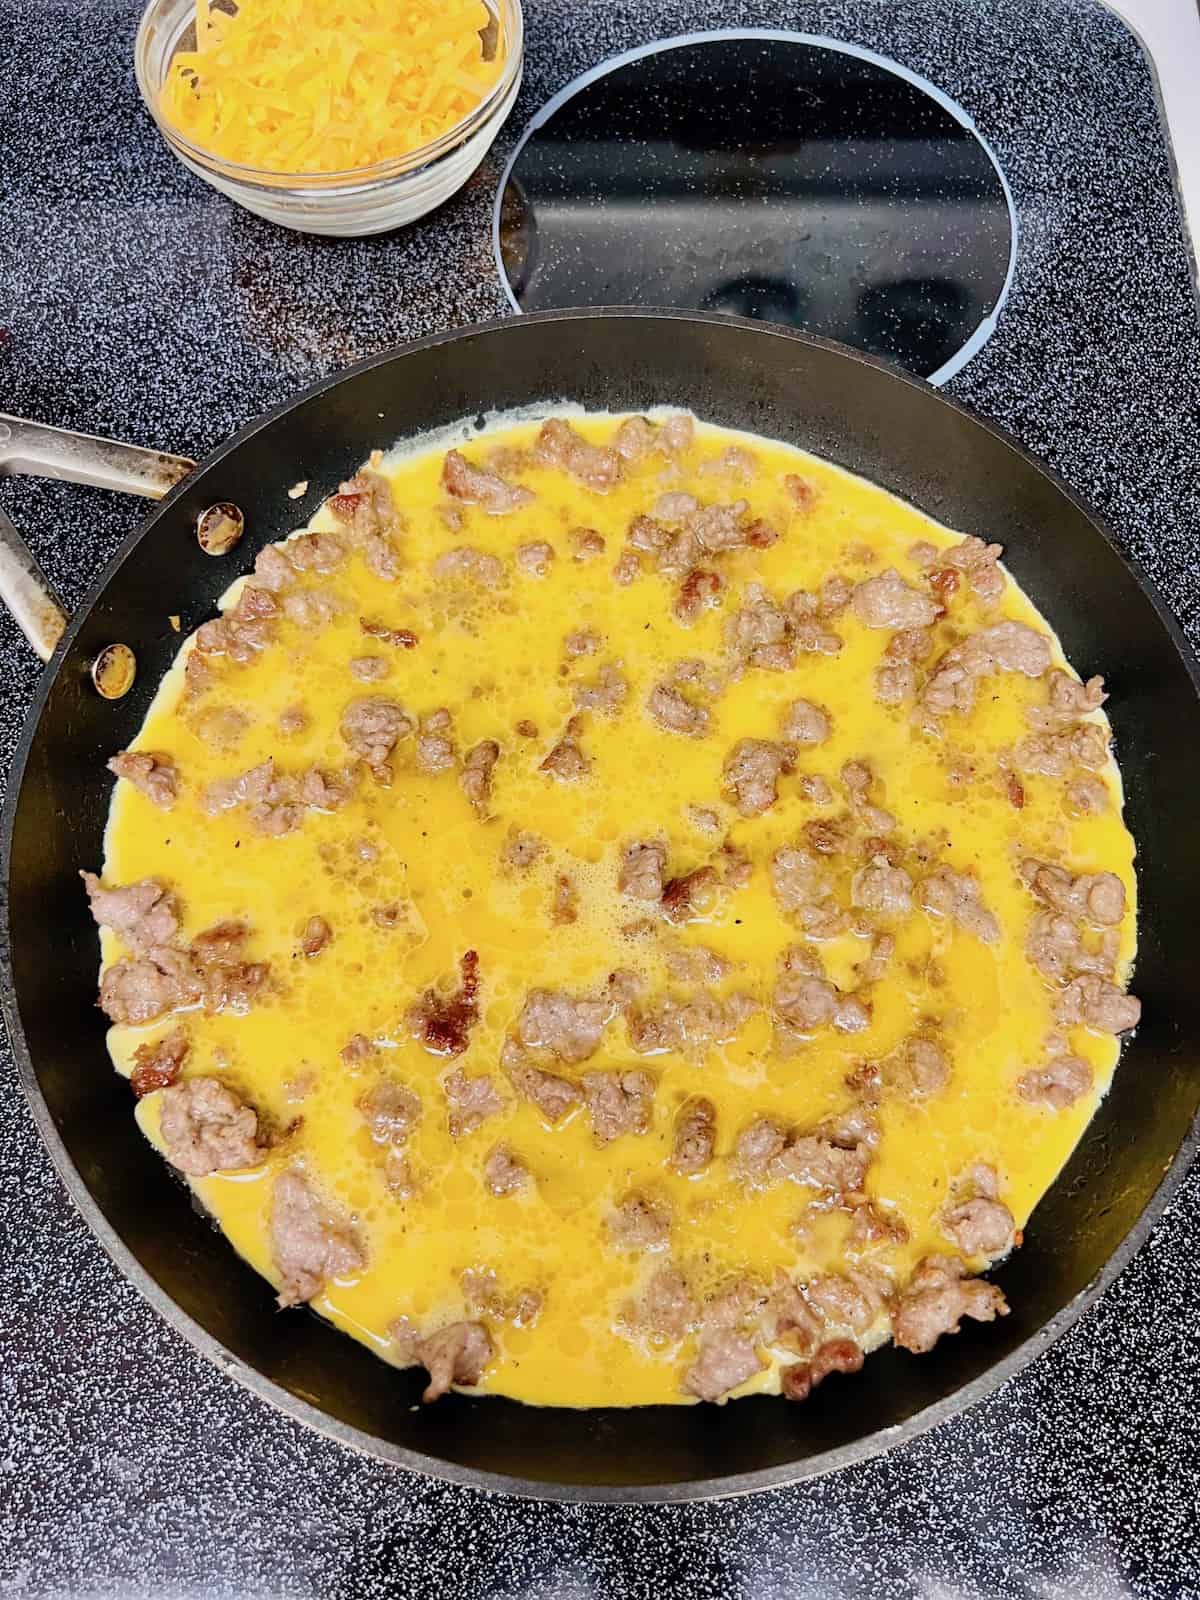 Liquid eggs in the skillet with cooked sausage crumbles.